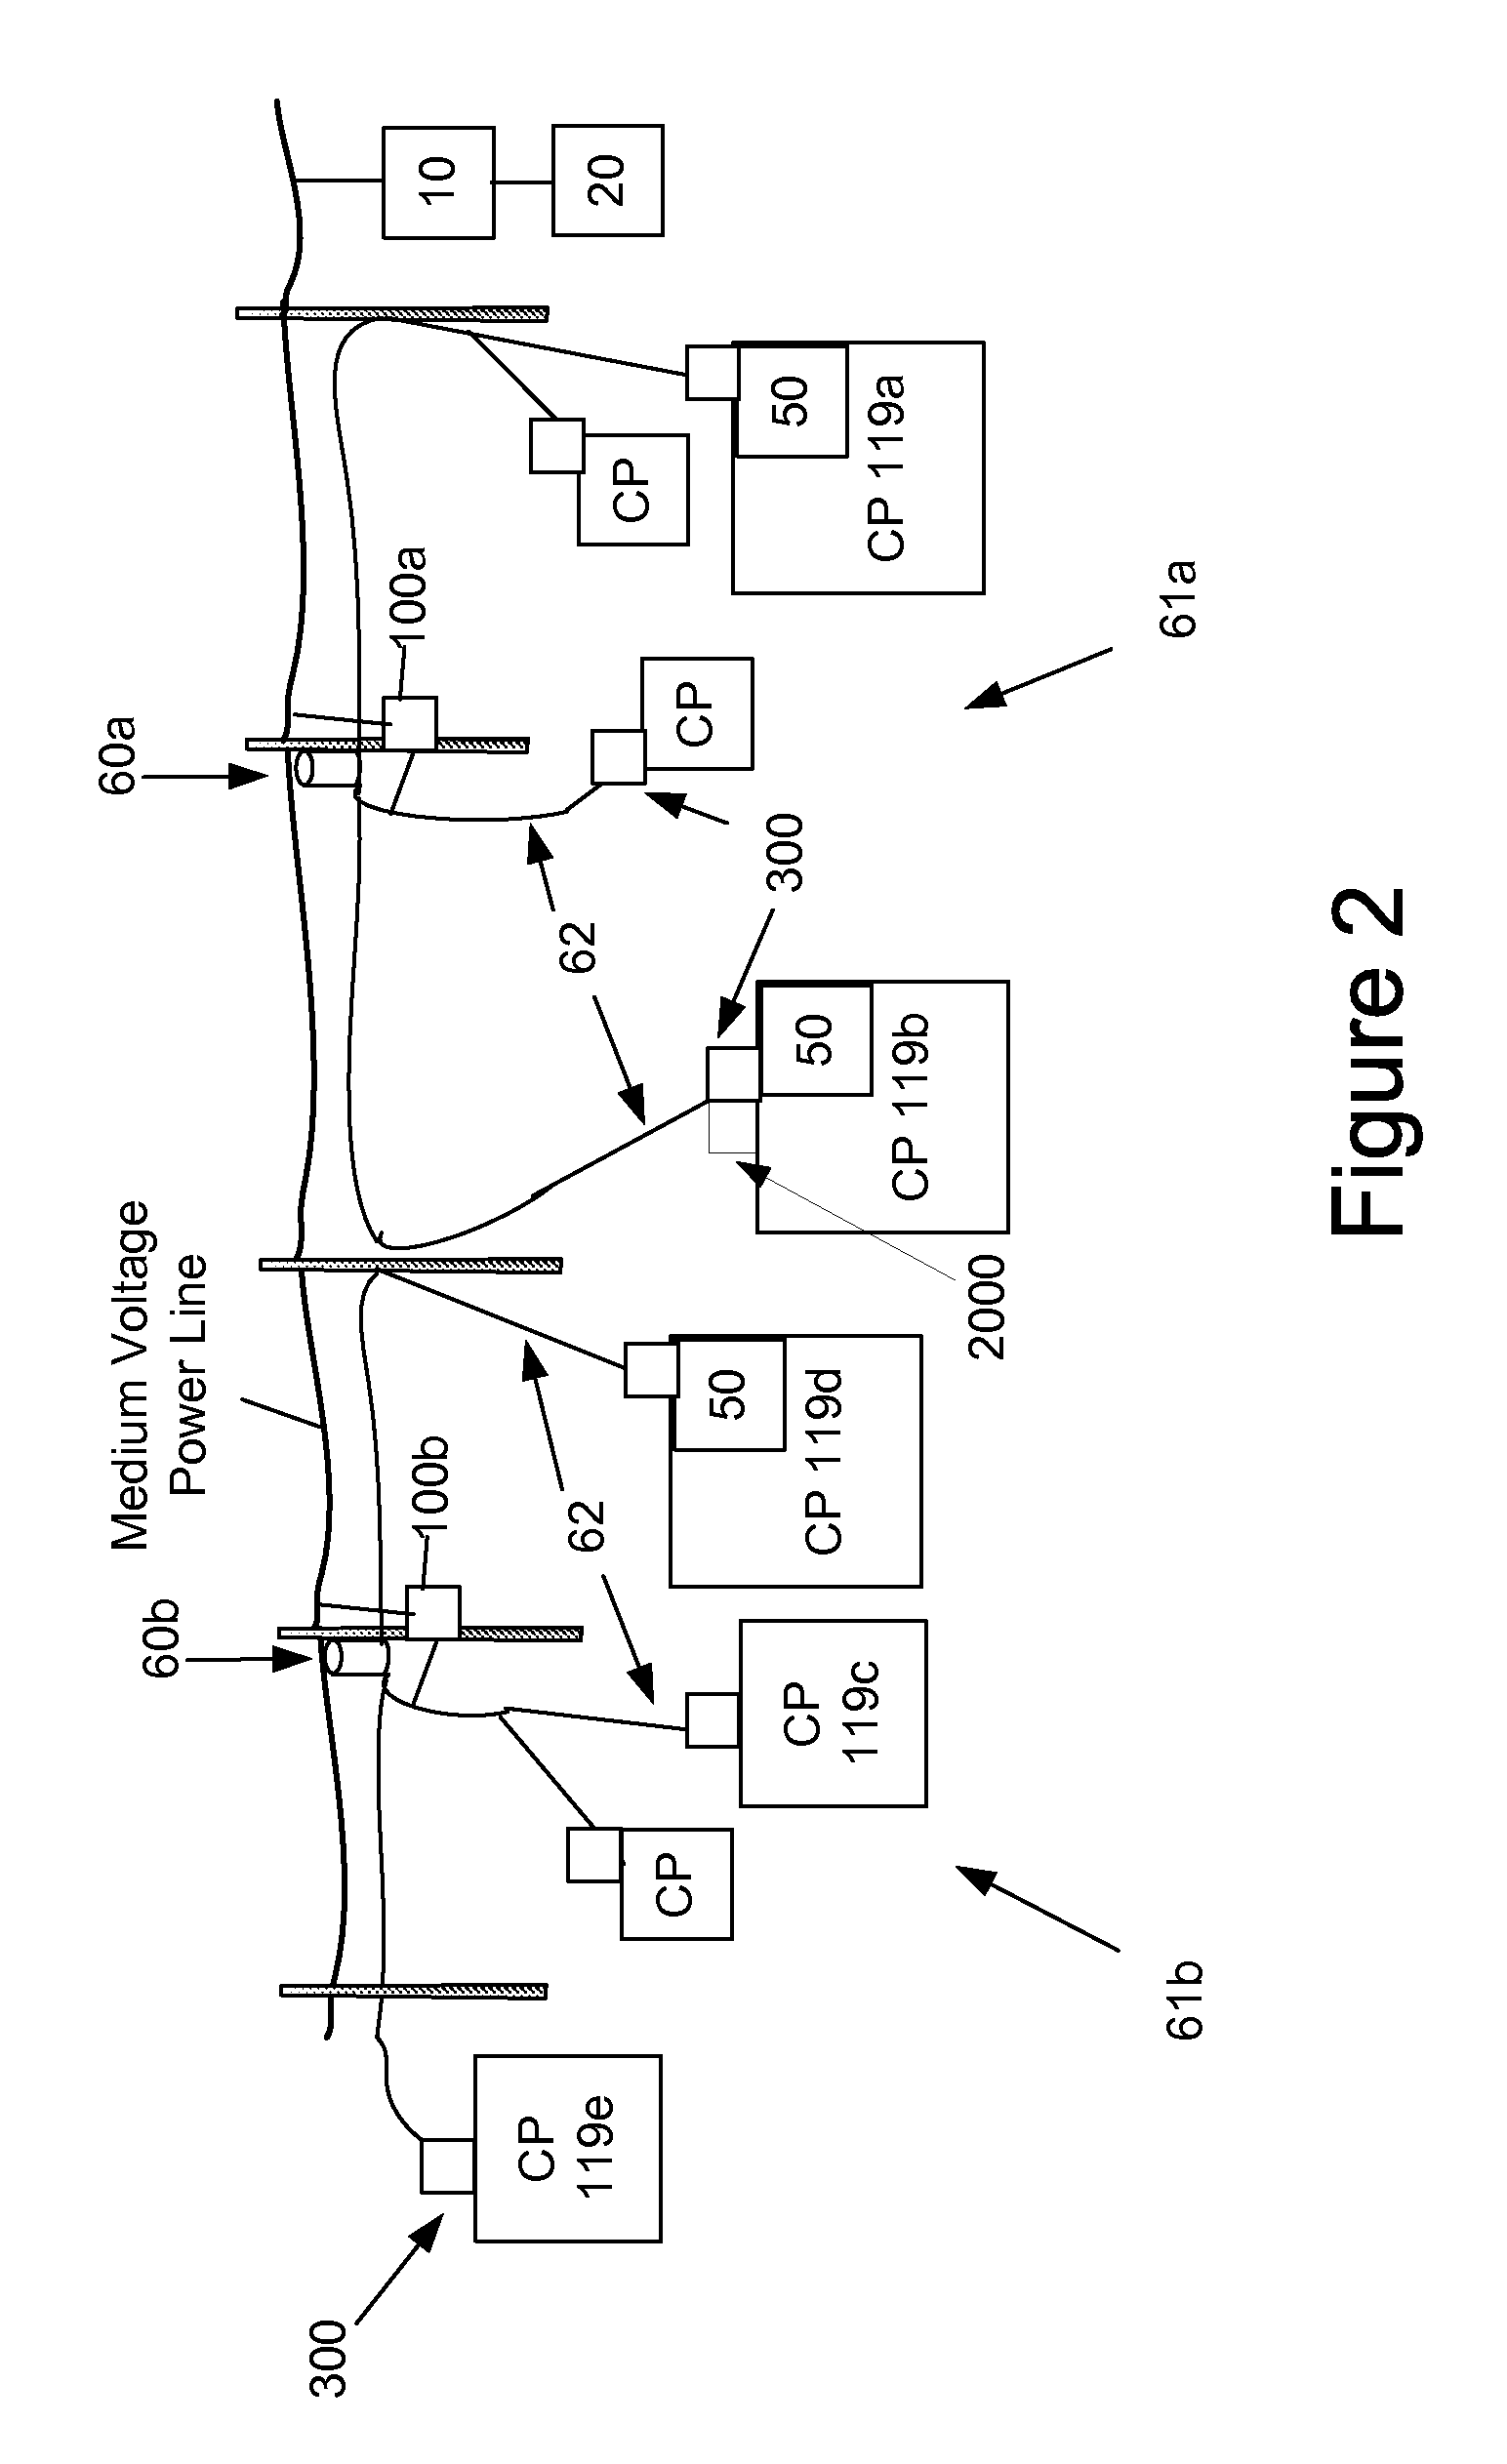 Power line communications module and method